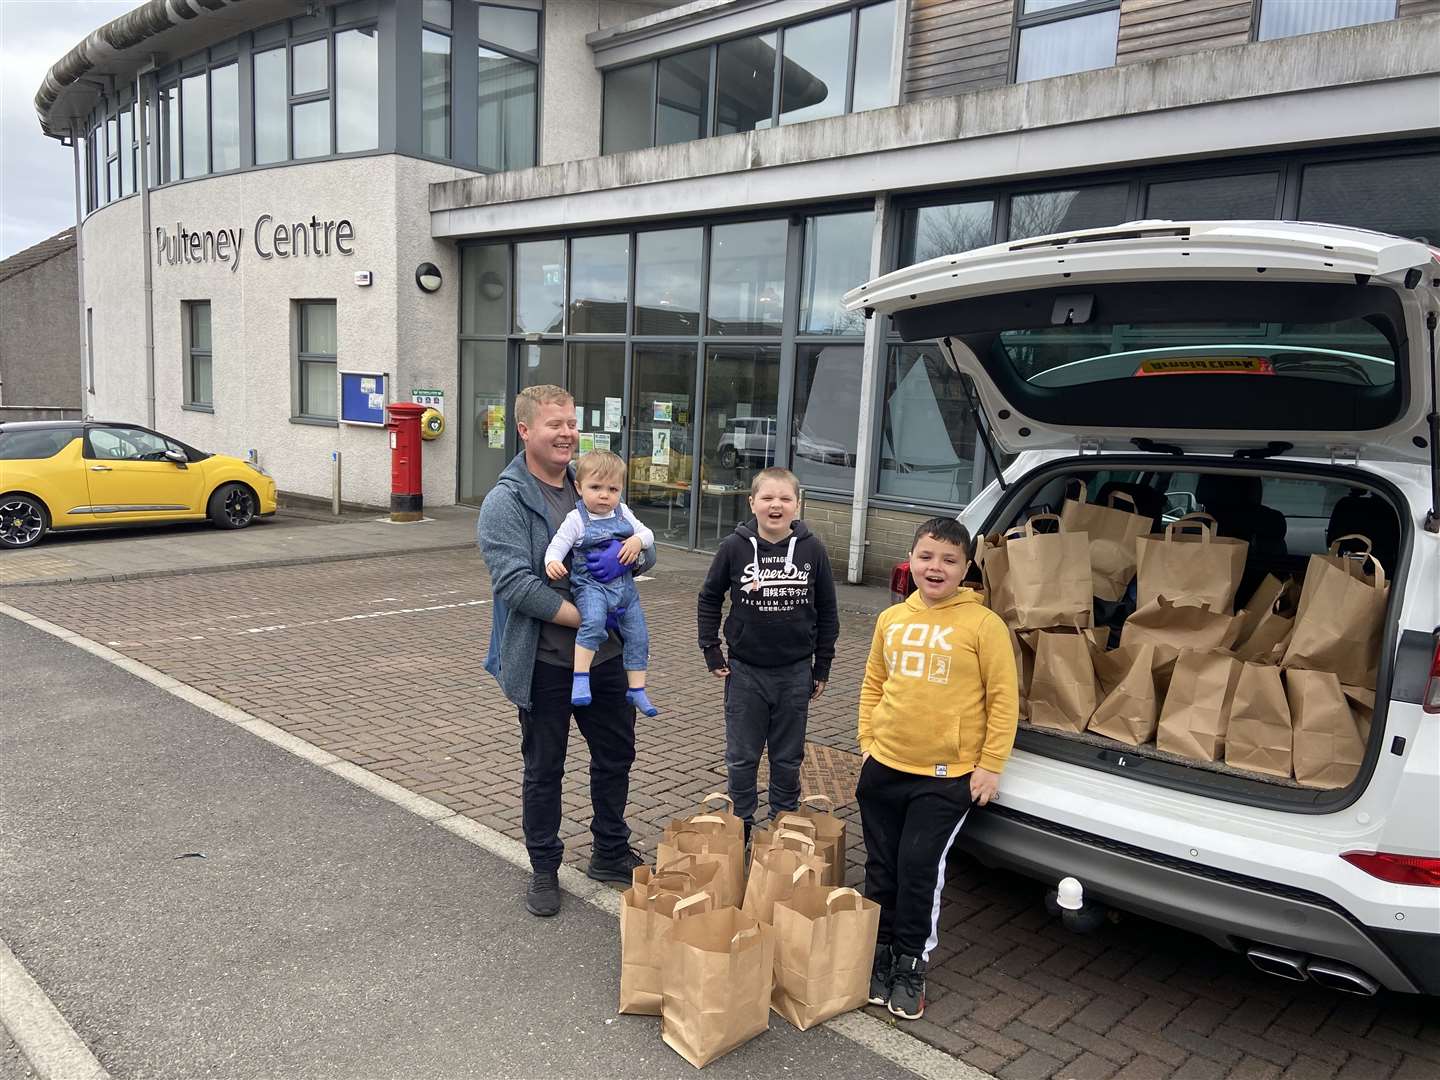 Getting ready to set off with a delivery of hot meals from the Pulteney Centre are volunteer Mark Munro and his boys – 20-month-old Jack Munro, along with Kyle (10) and seven-year-old Alex Shearer.